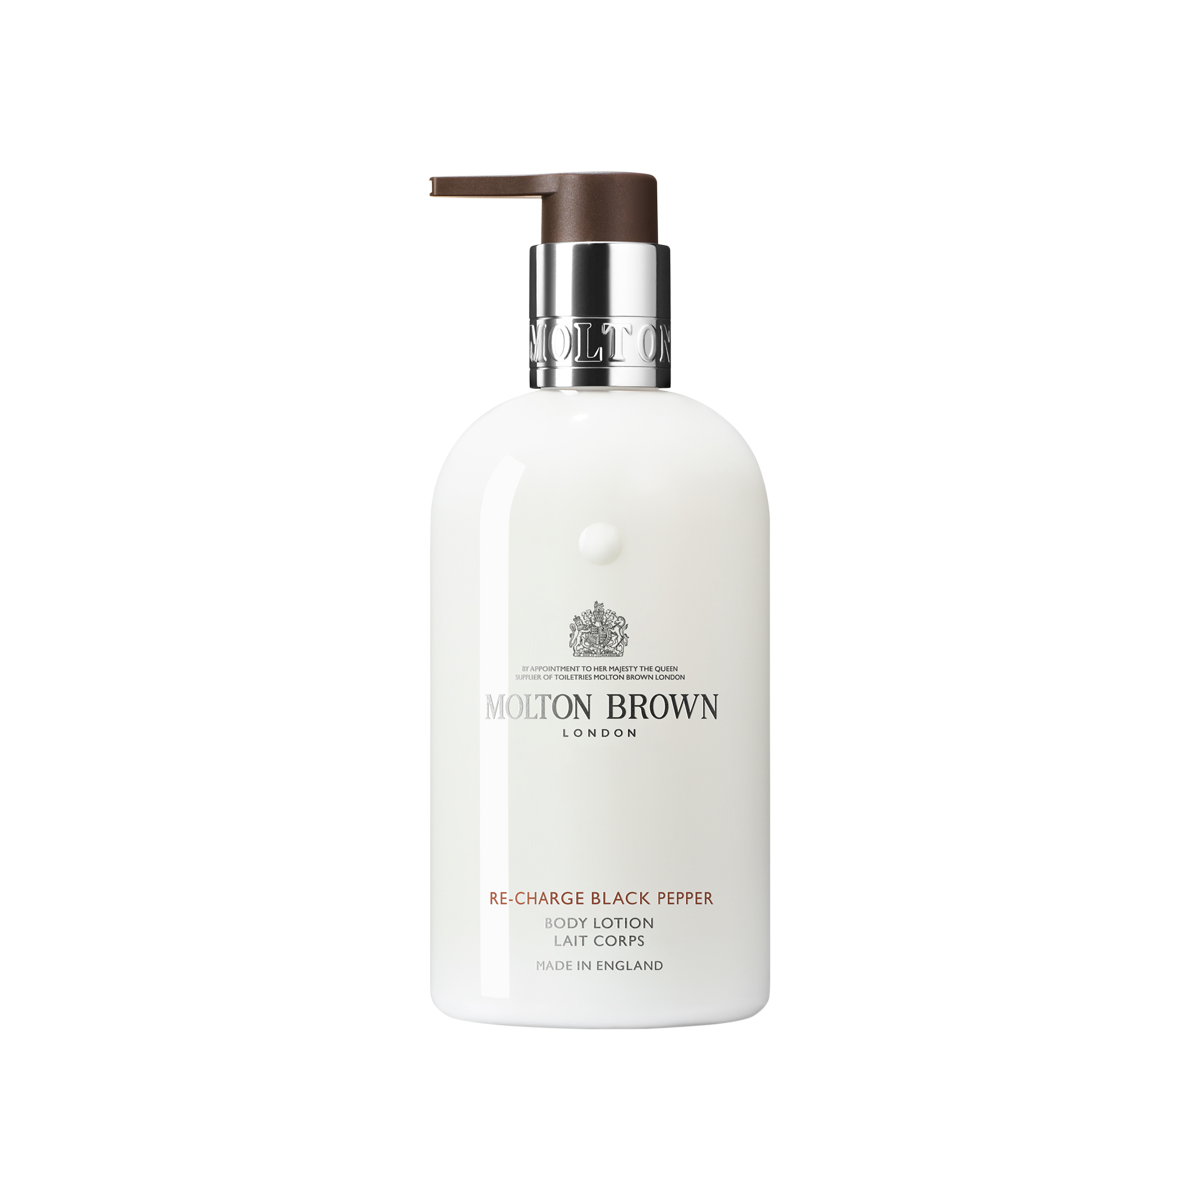 Molton Brown - Re-Charge Black Pepper Body Lotion